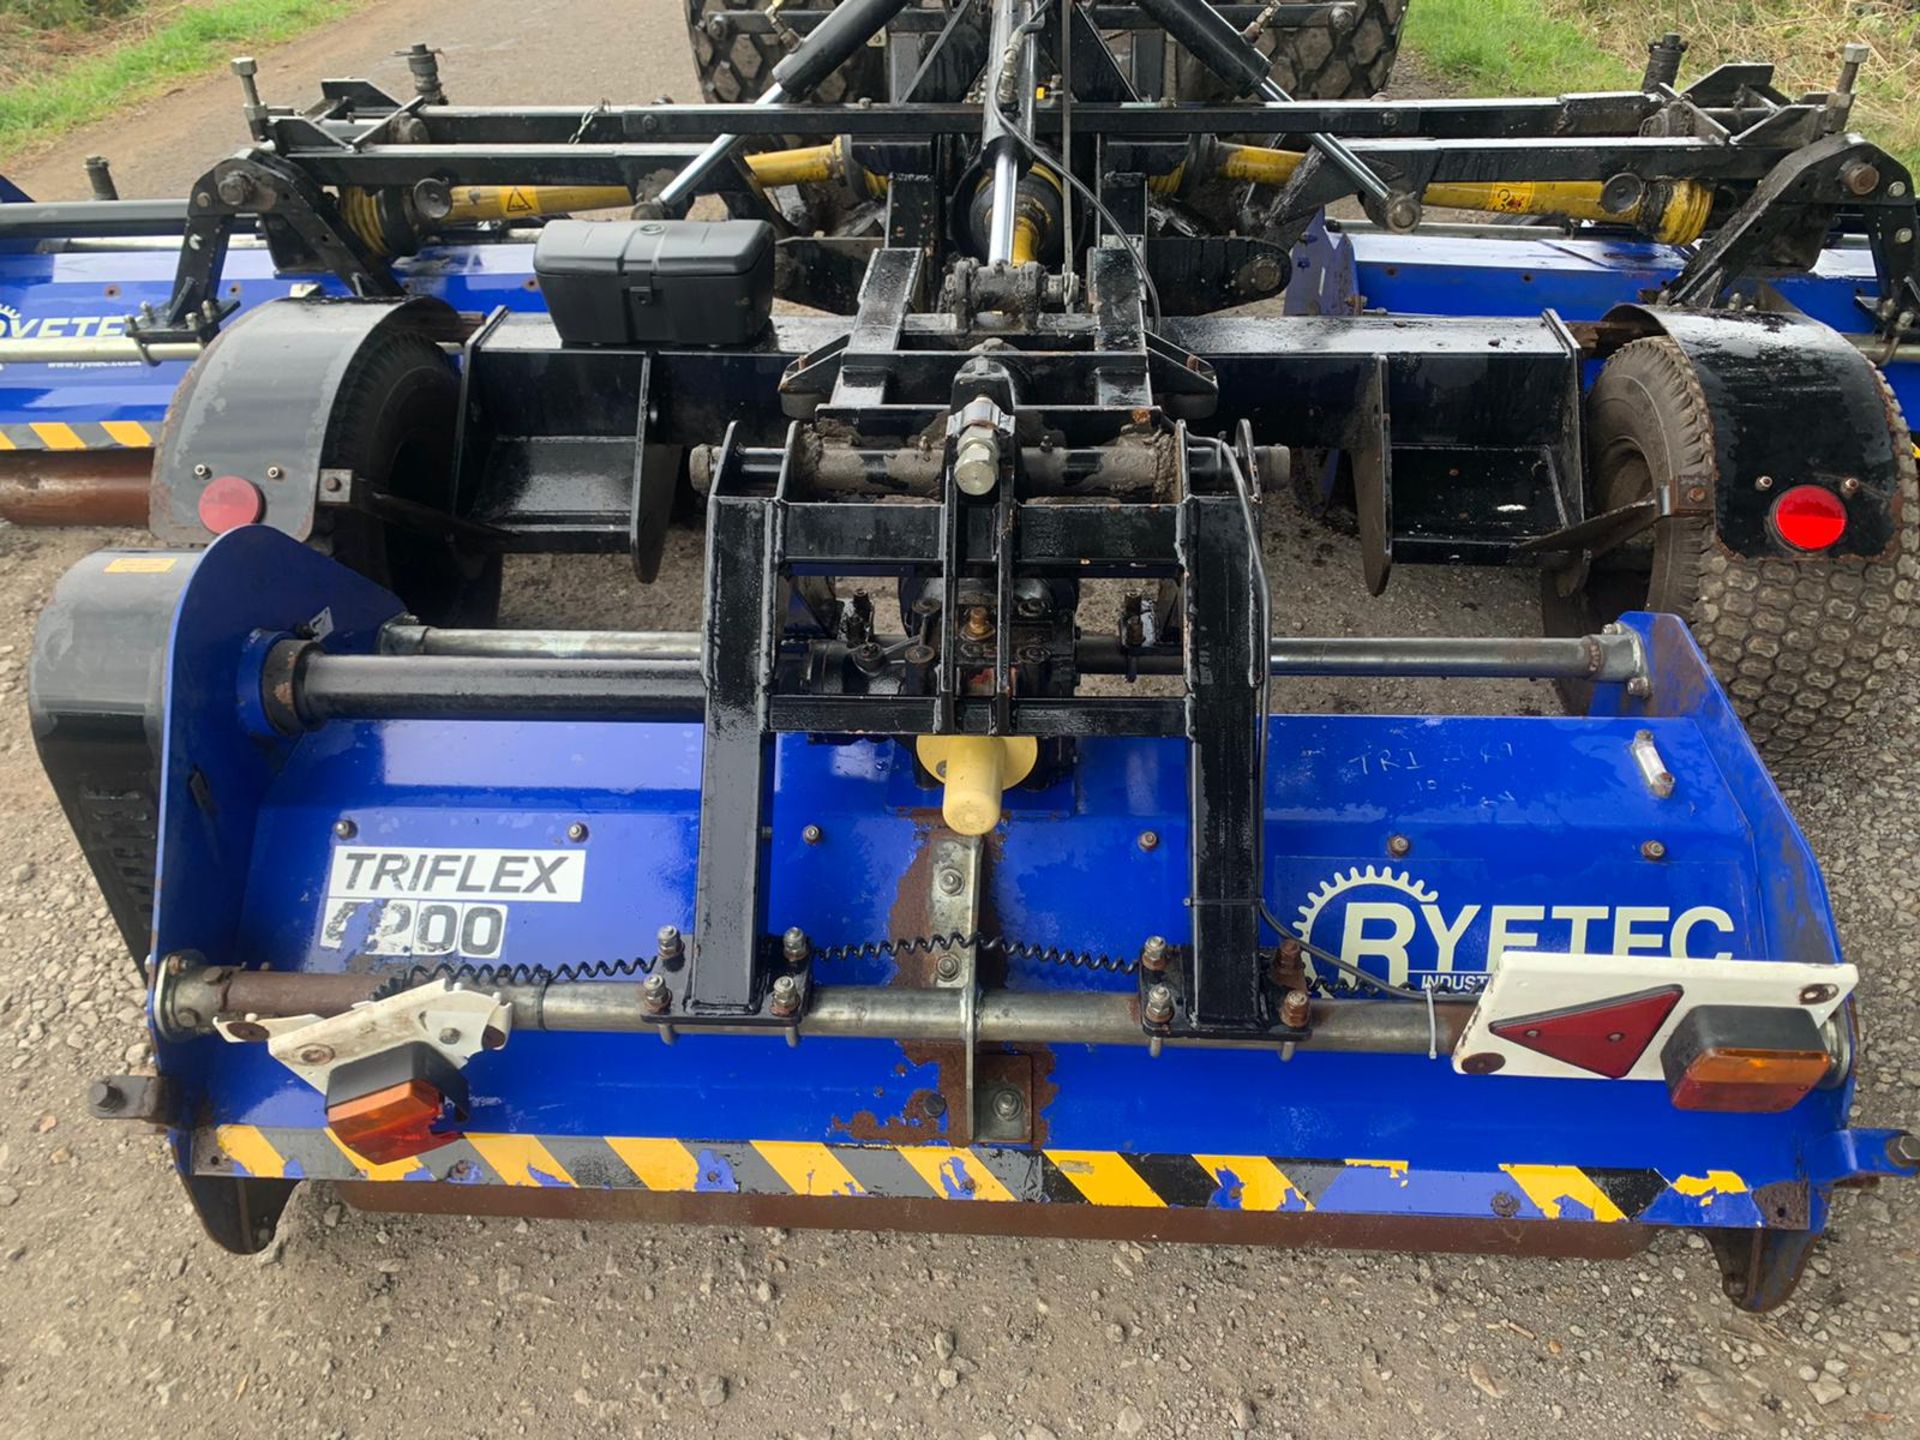 RYETEC TRIFLEX 4200 TOWBEHIND FLAIL 3 GANG MOWER, IN WORKING ORDER, PTO DRIVEN *PLUS VAT* - Image 6 of 15